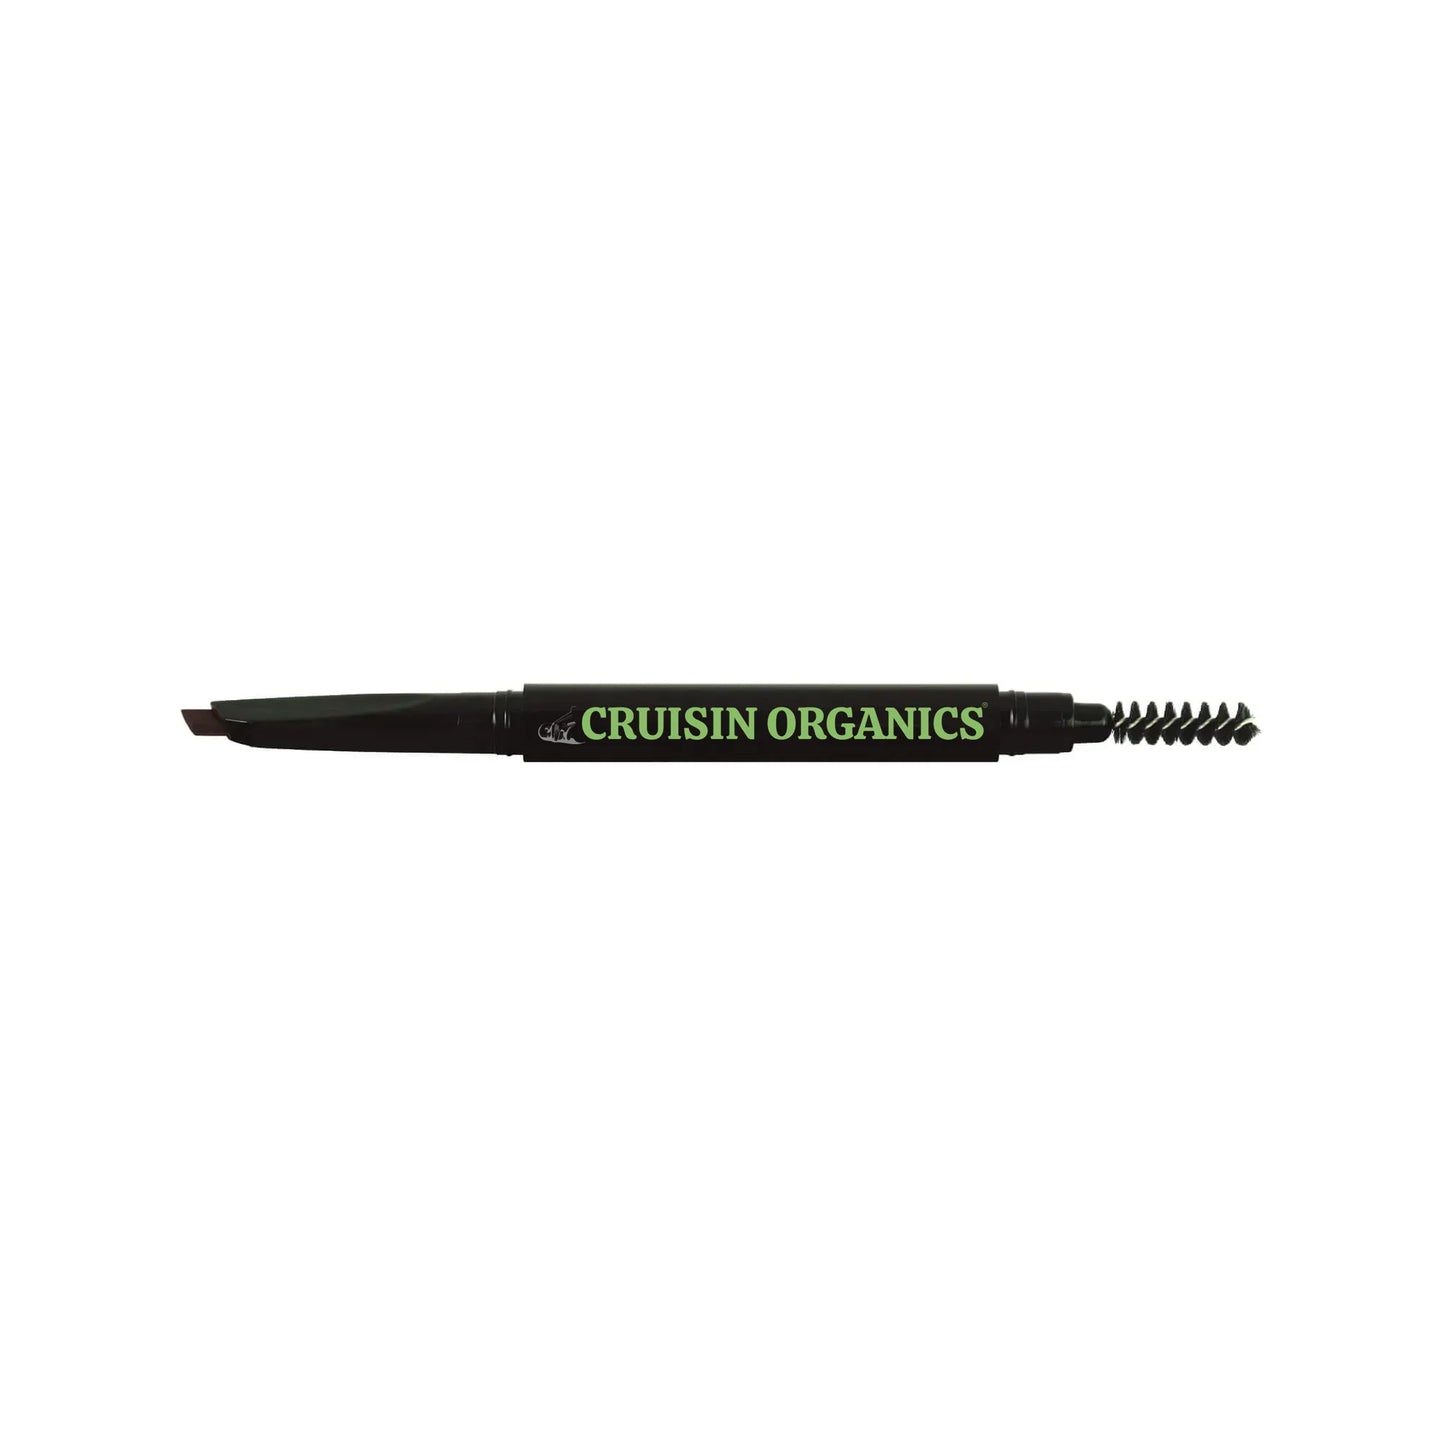 Cruisin Organics Automatic Eyebrow Pencil, Charcoal. You can build a full brow from scratch with our all-in-one eyebrow pencil. This dual-tip brow pencil helps you achieve a natural brow shape with an angled tip on one end and a spooly tip on the other! The angled tip makes it easy to fill in long-lasting color into your brows. Our formula multitasks to give you color, sculpture, and sealing for your brows. With the spooly tip, you can blend the color